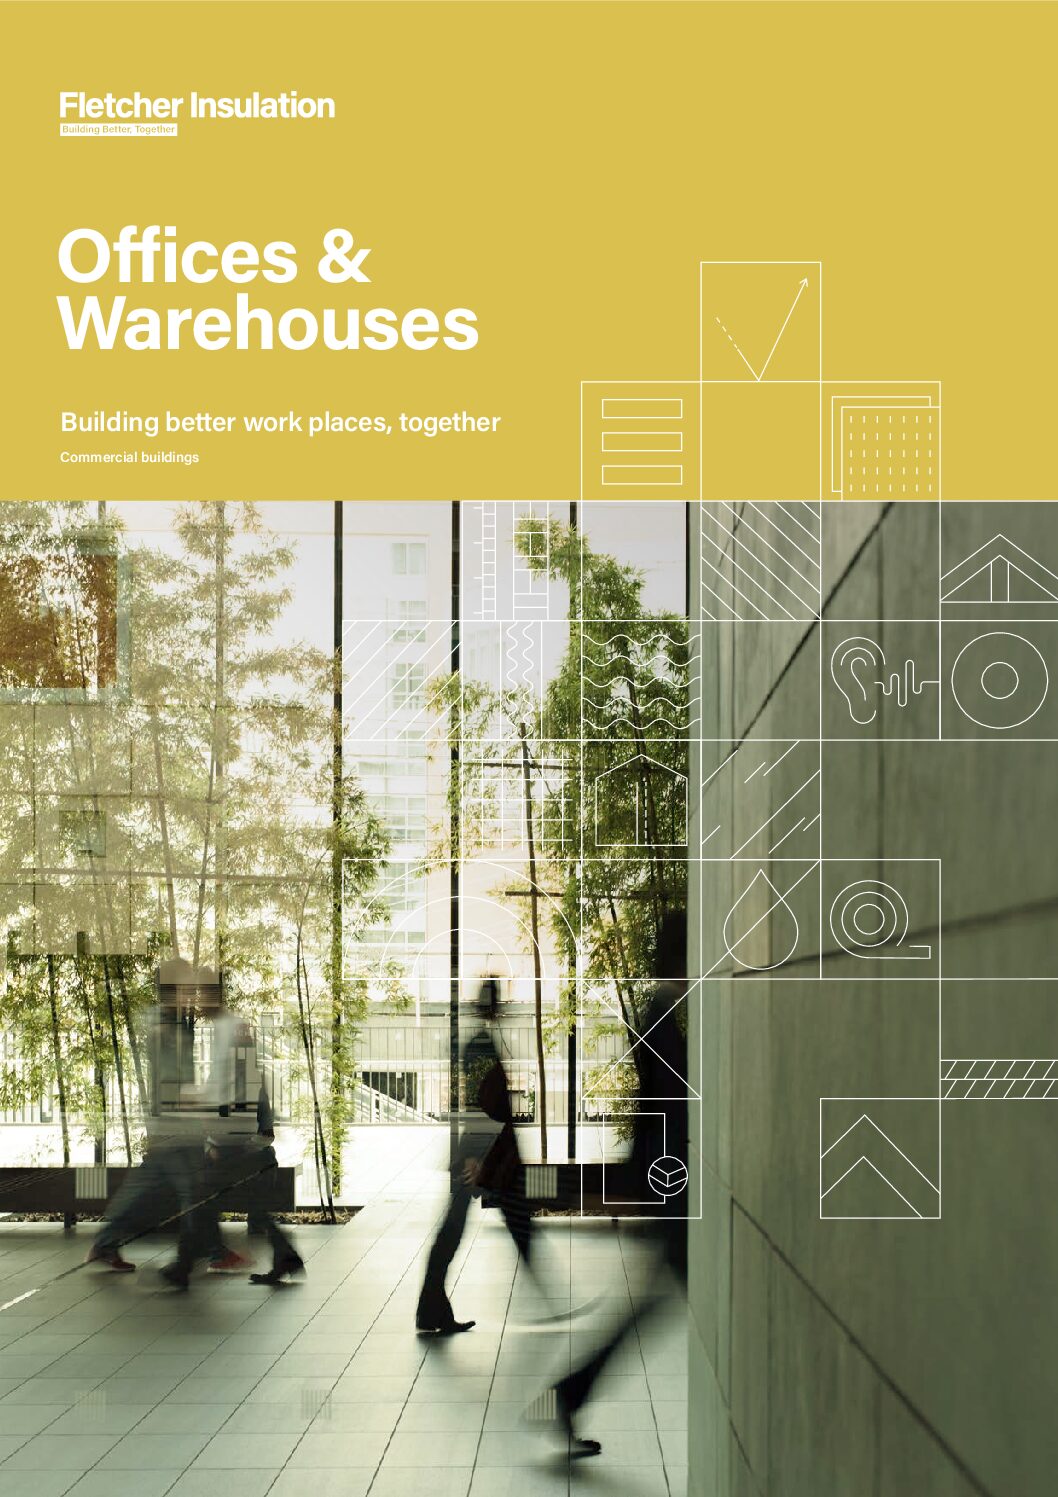 Offices & Warehouses – Building Better Workplaces